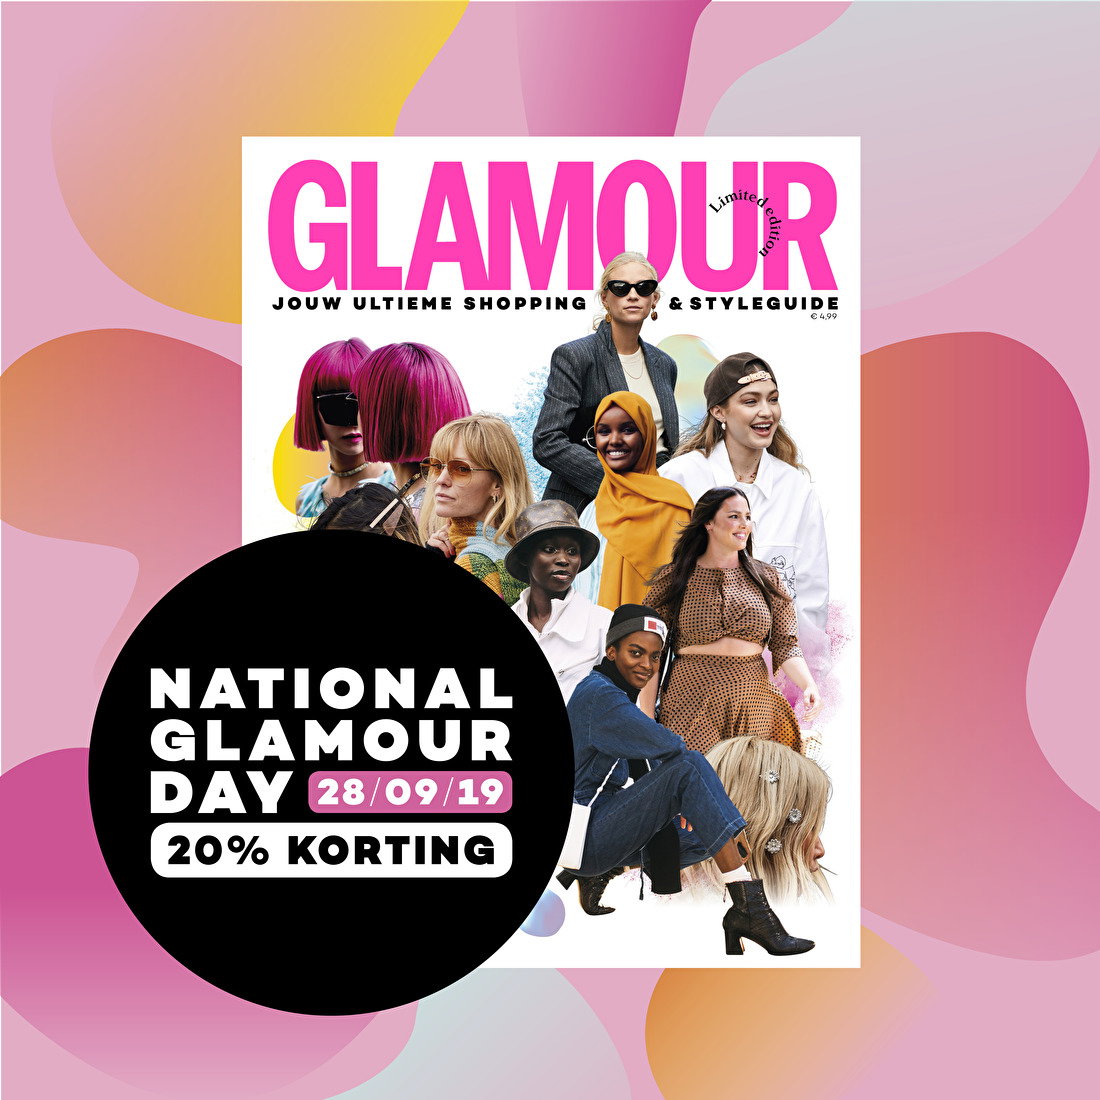 Intensief Harnas bungeejumpen Its-beautiful.nl: National Glamour Day met 20% korting! | Milled